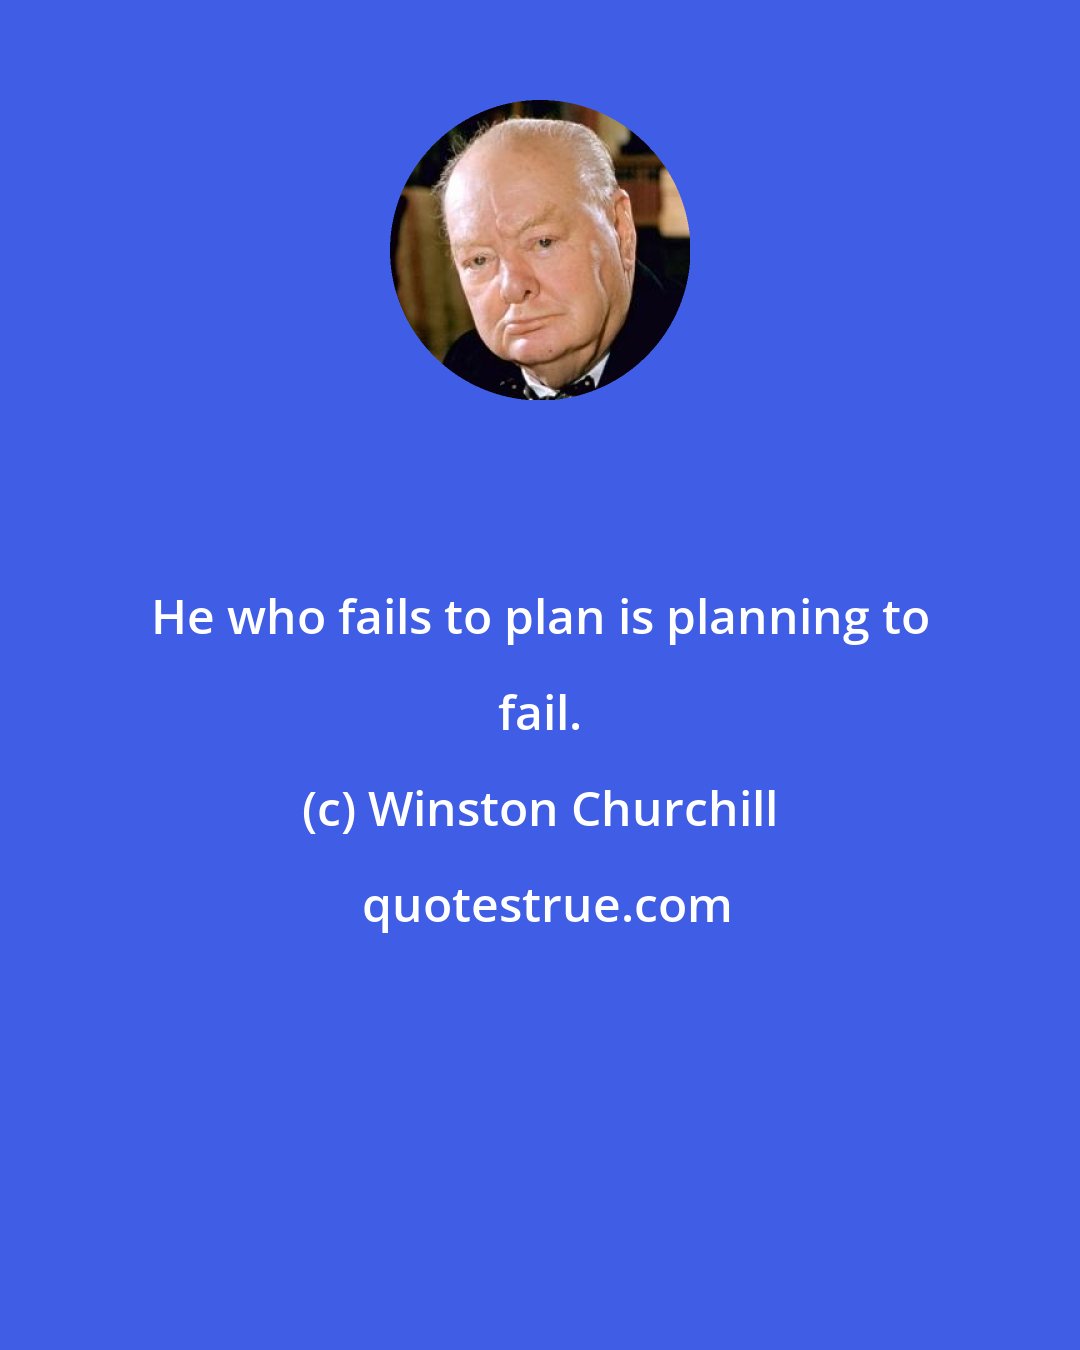 Winston Churchill: He who fails to plan is planning to fail.